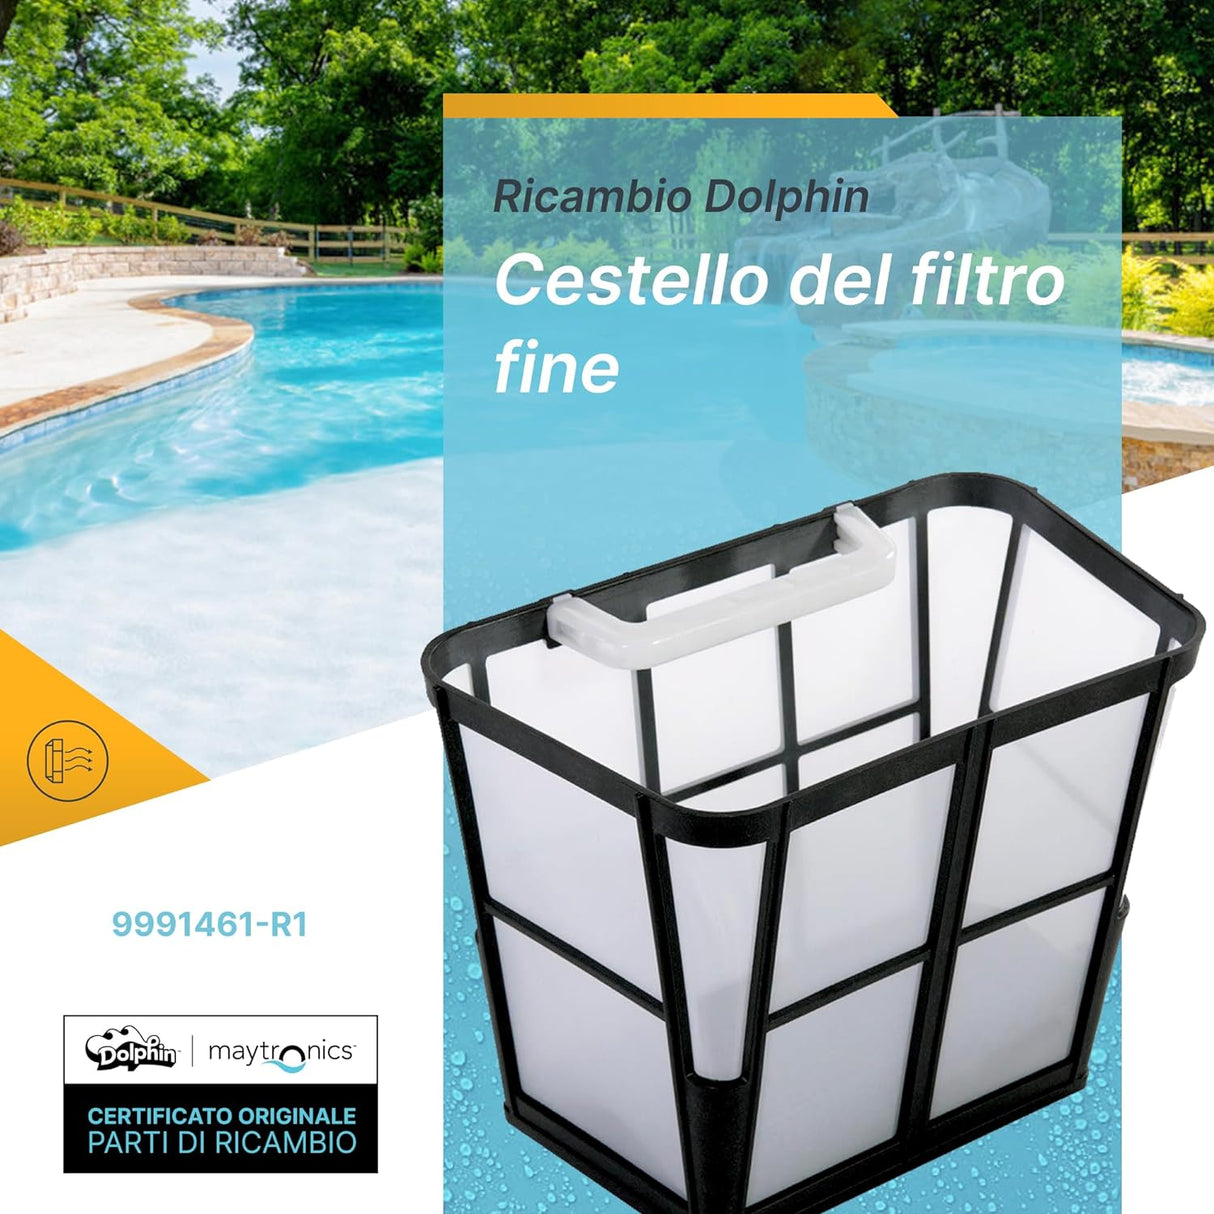 Large Gradation Filter Basket 100 Micron for Pool Robot Maytronics Dolphin Poolstyle AG / Run10 / SX10 / E10 / SM10 &amp; Mr10